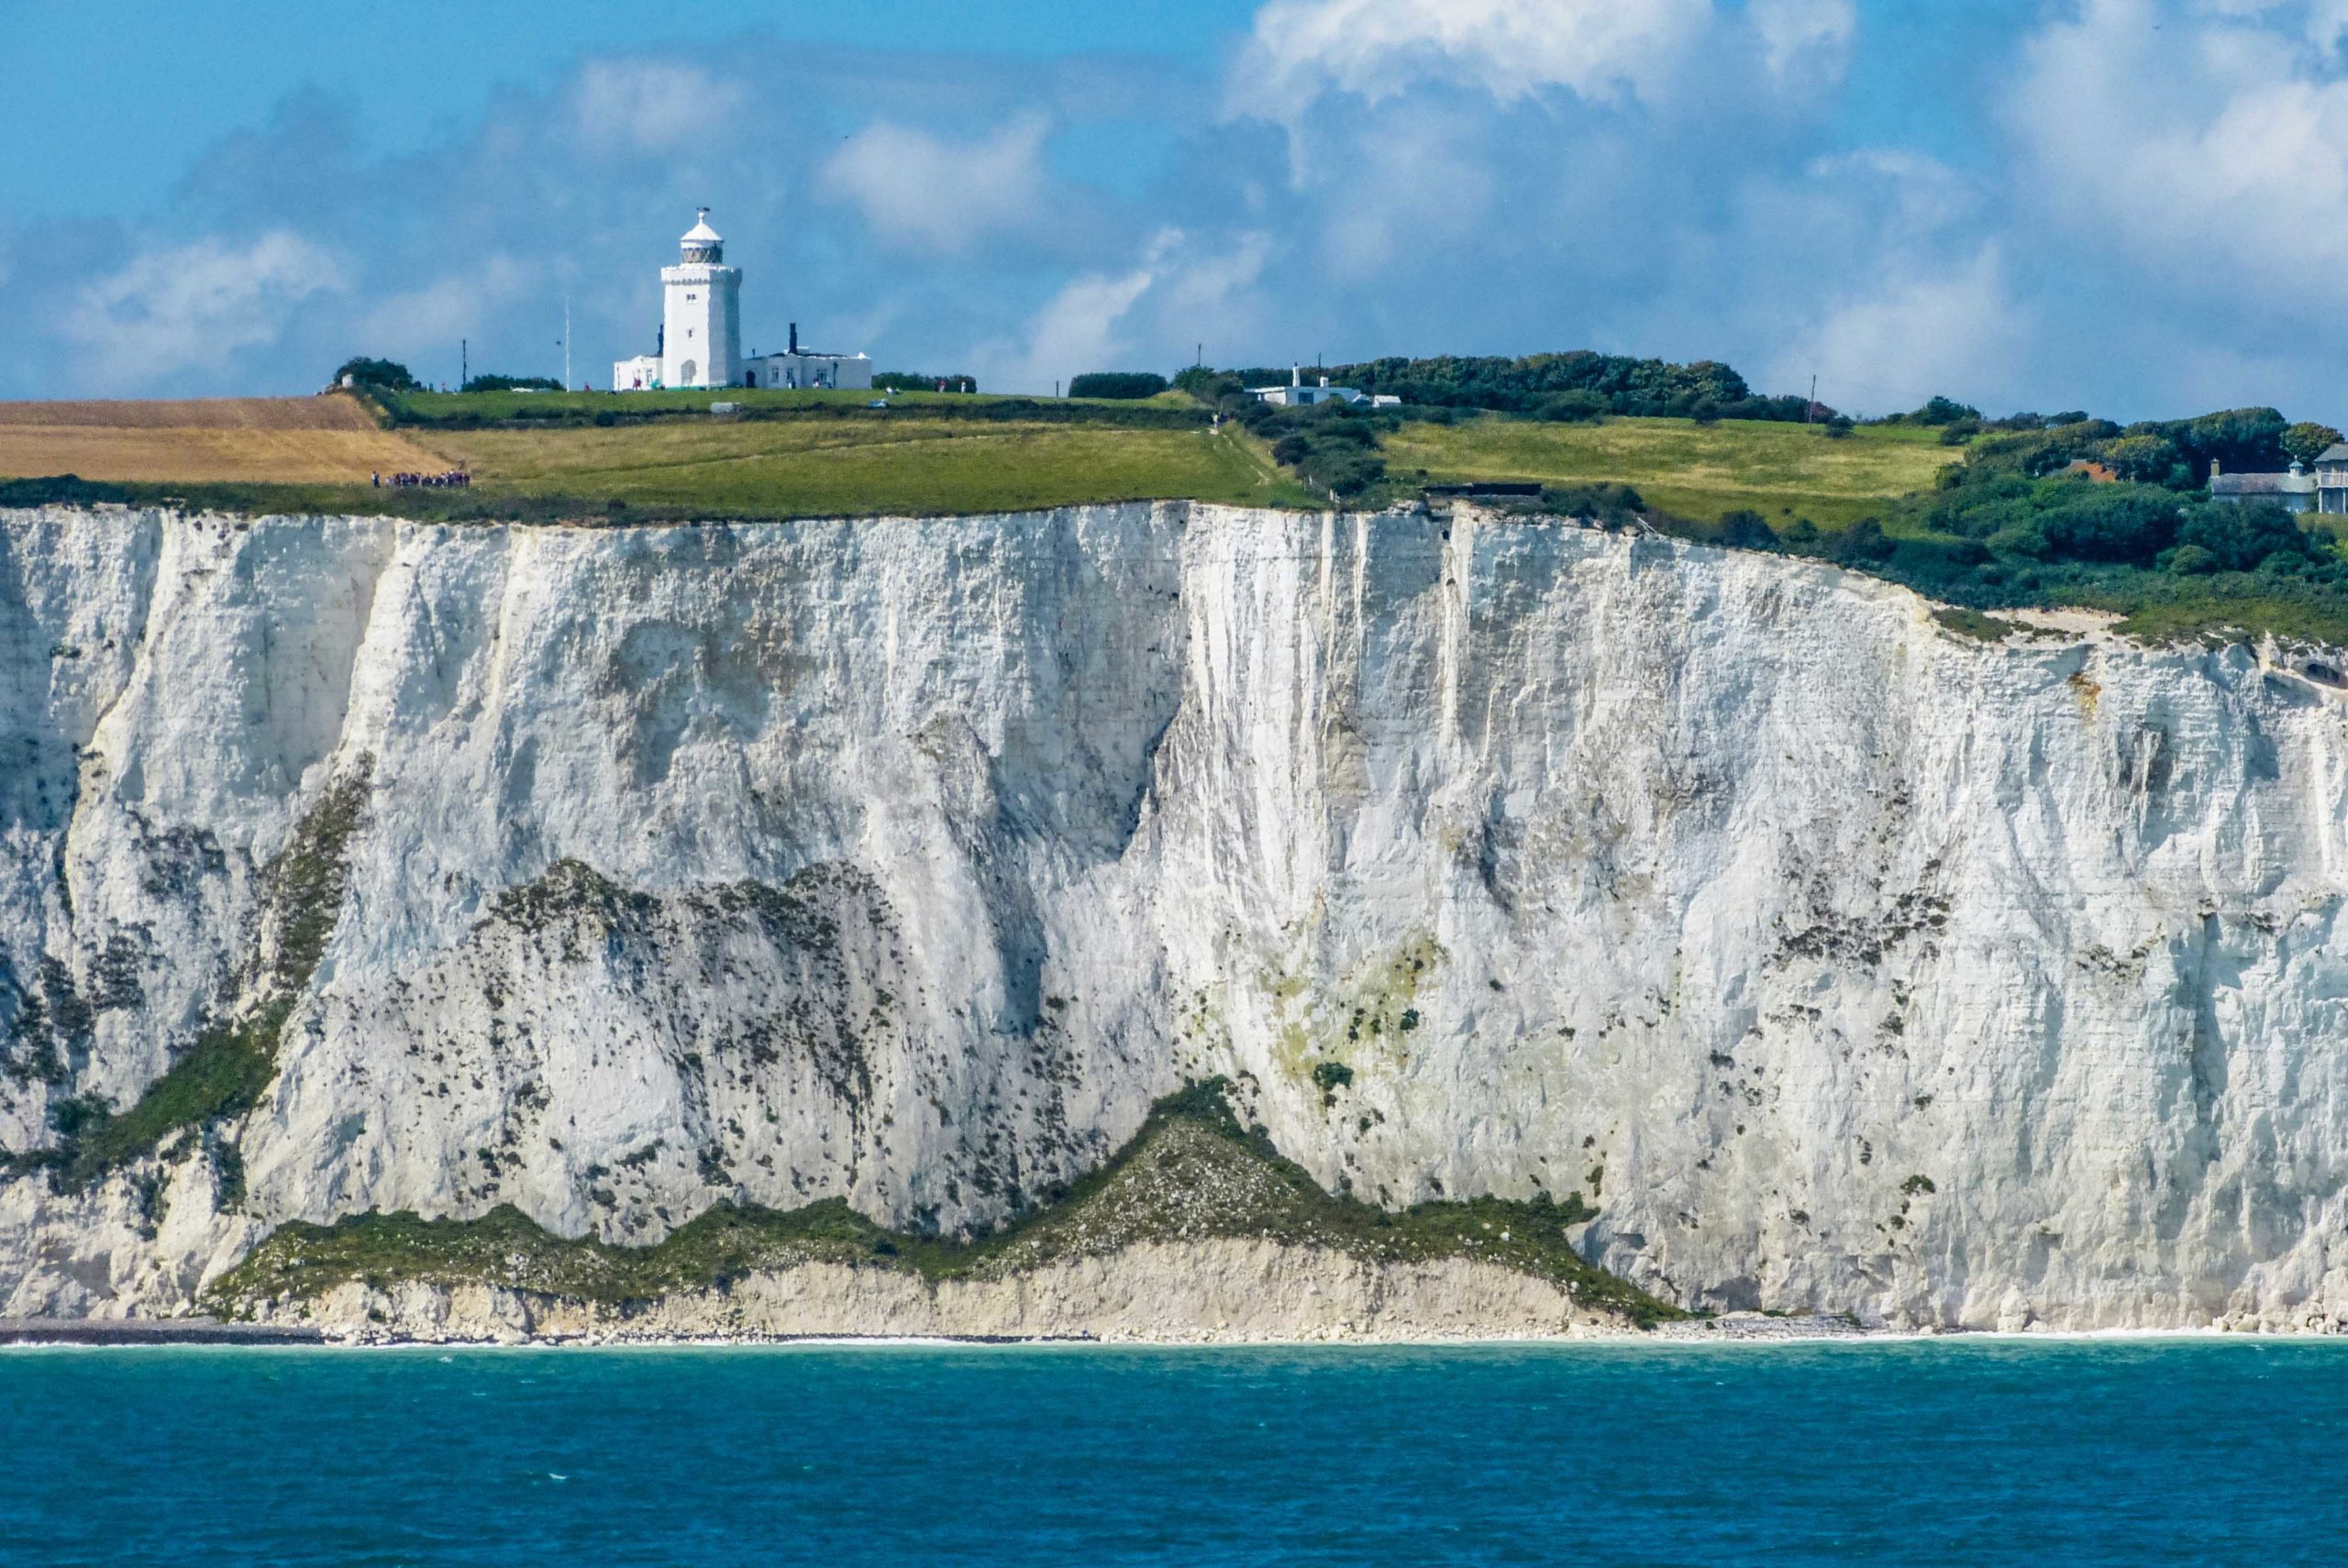 South Foreland Lighthouse © Archangel12 - licence [CC BY 2.0] from Wikimedia Commons